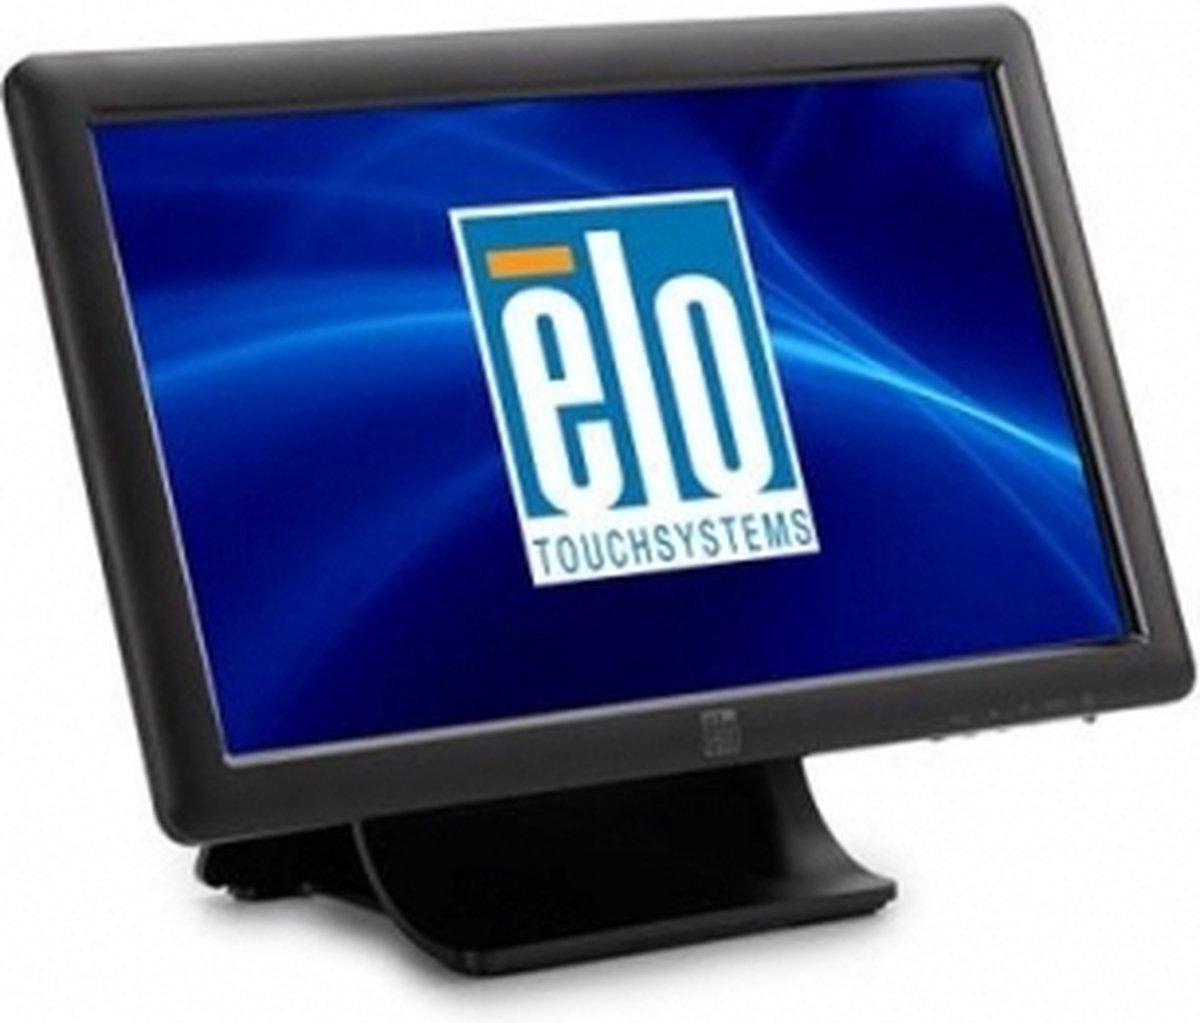 Elo Touchsystems 1509L - Monitor